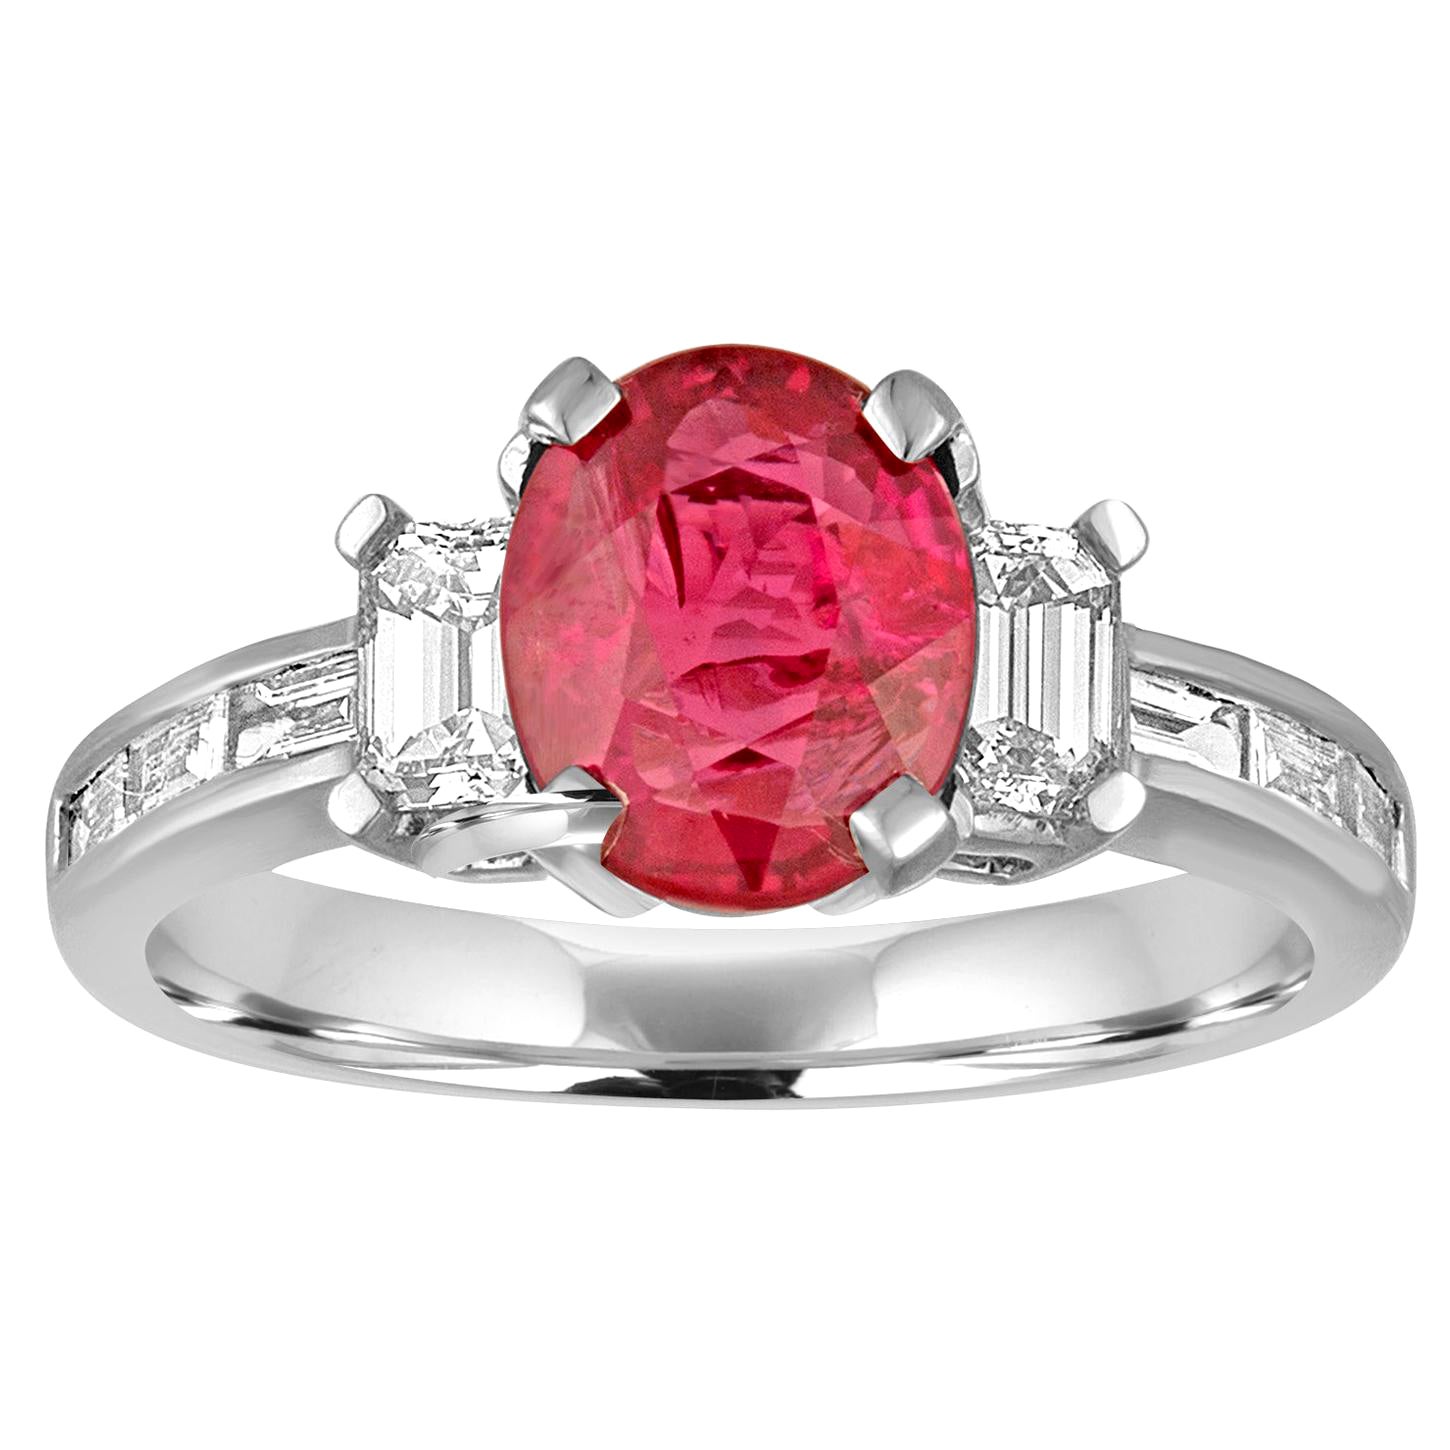 Certified No Heat 2.01 Carat Oval Ruby Diamond Three-Stone Gold Ring For Sale